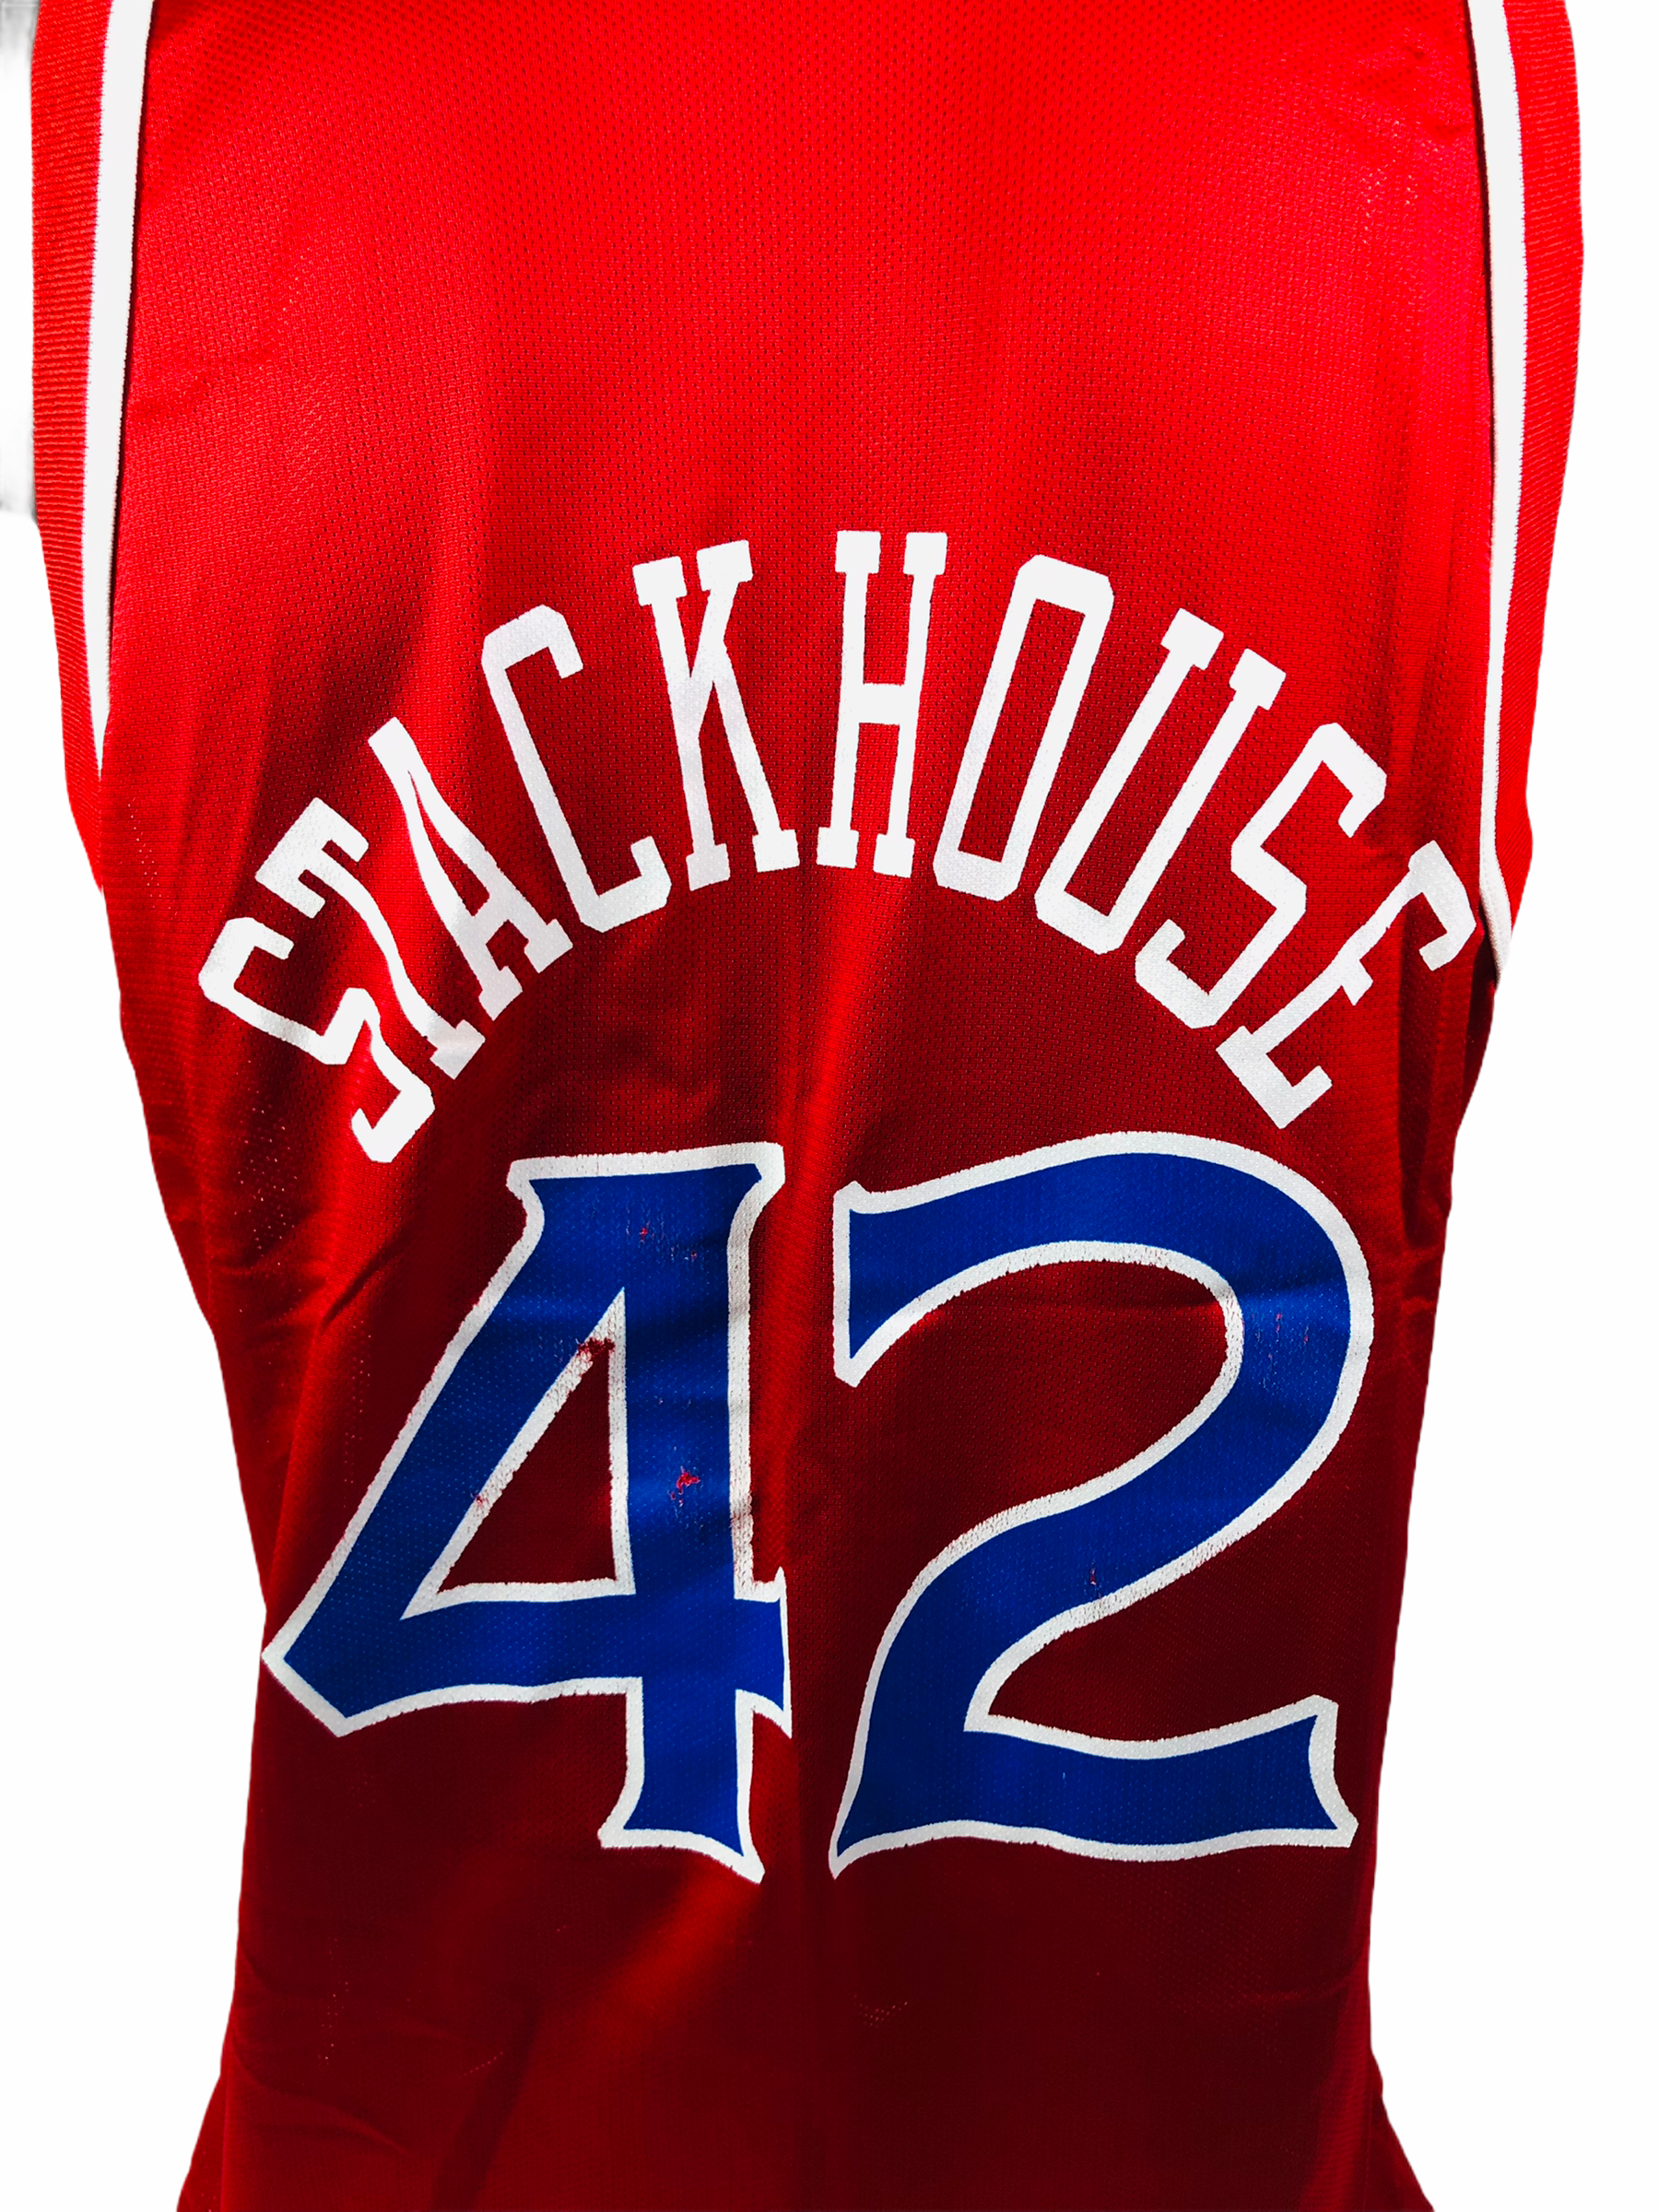 jerry stackhouse sixers jersey